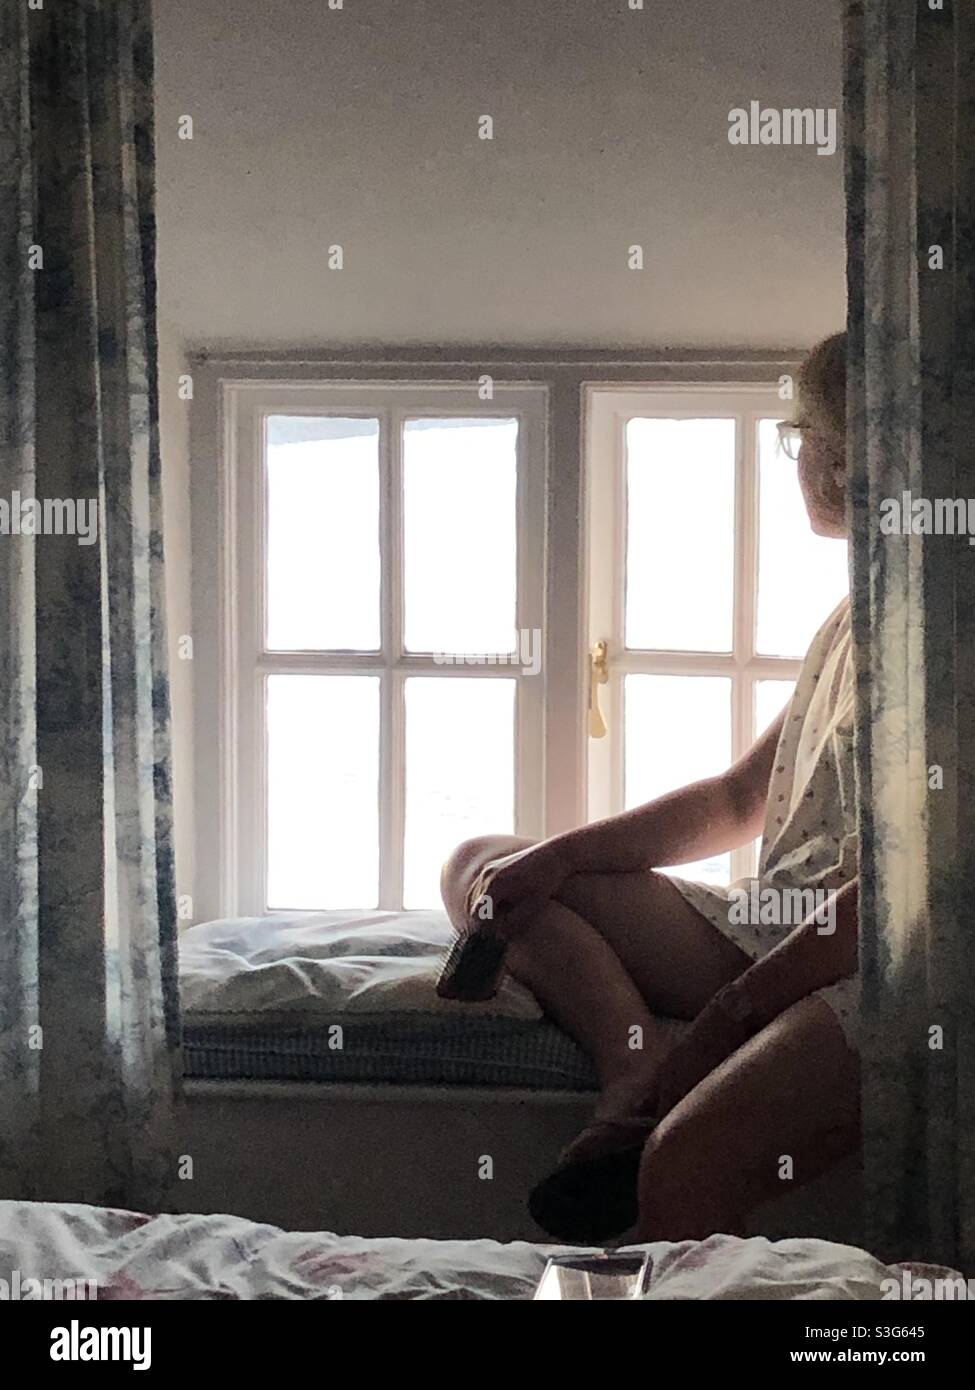 A lonely woman sitting at a window seat in her bedroom and looking out of the window n a mental health concept Stock Photo